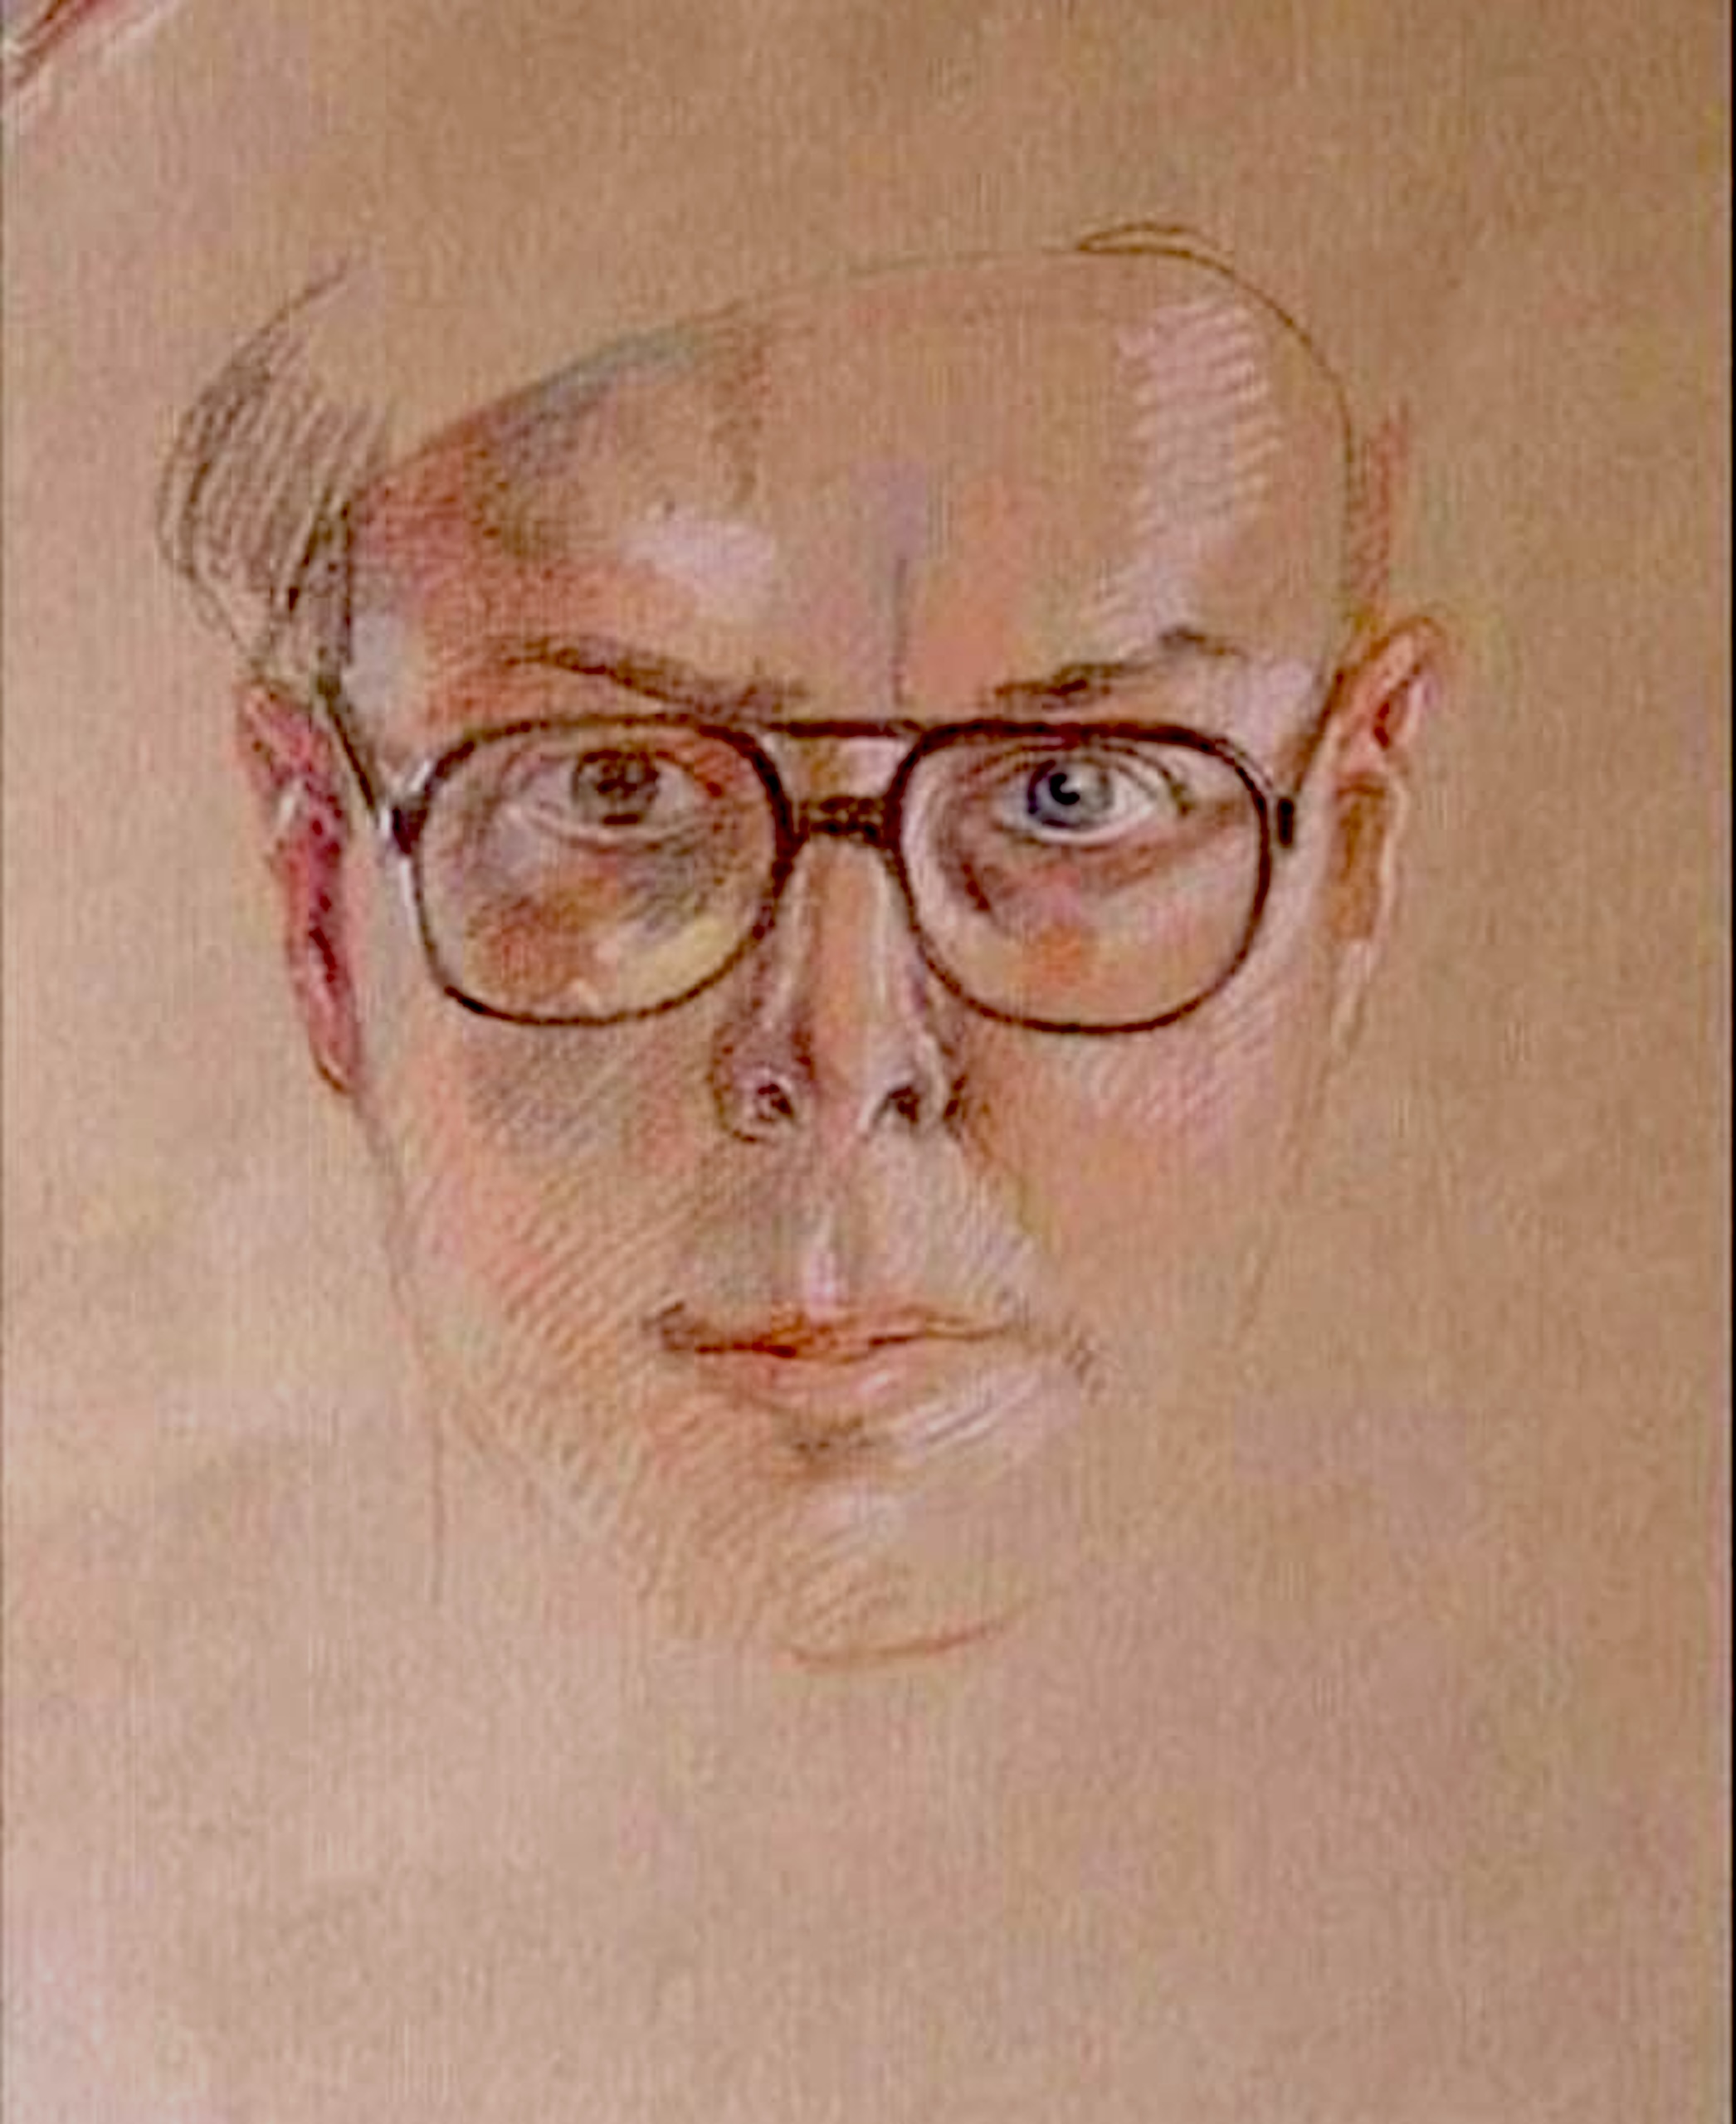 Self-portrait coloured pencil on tinted paper